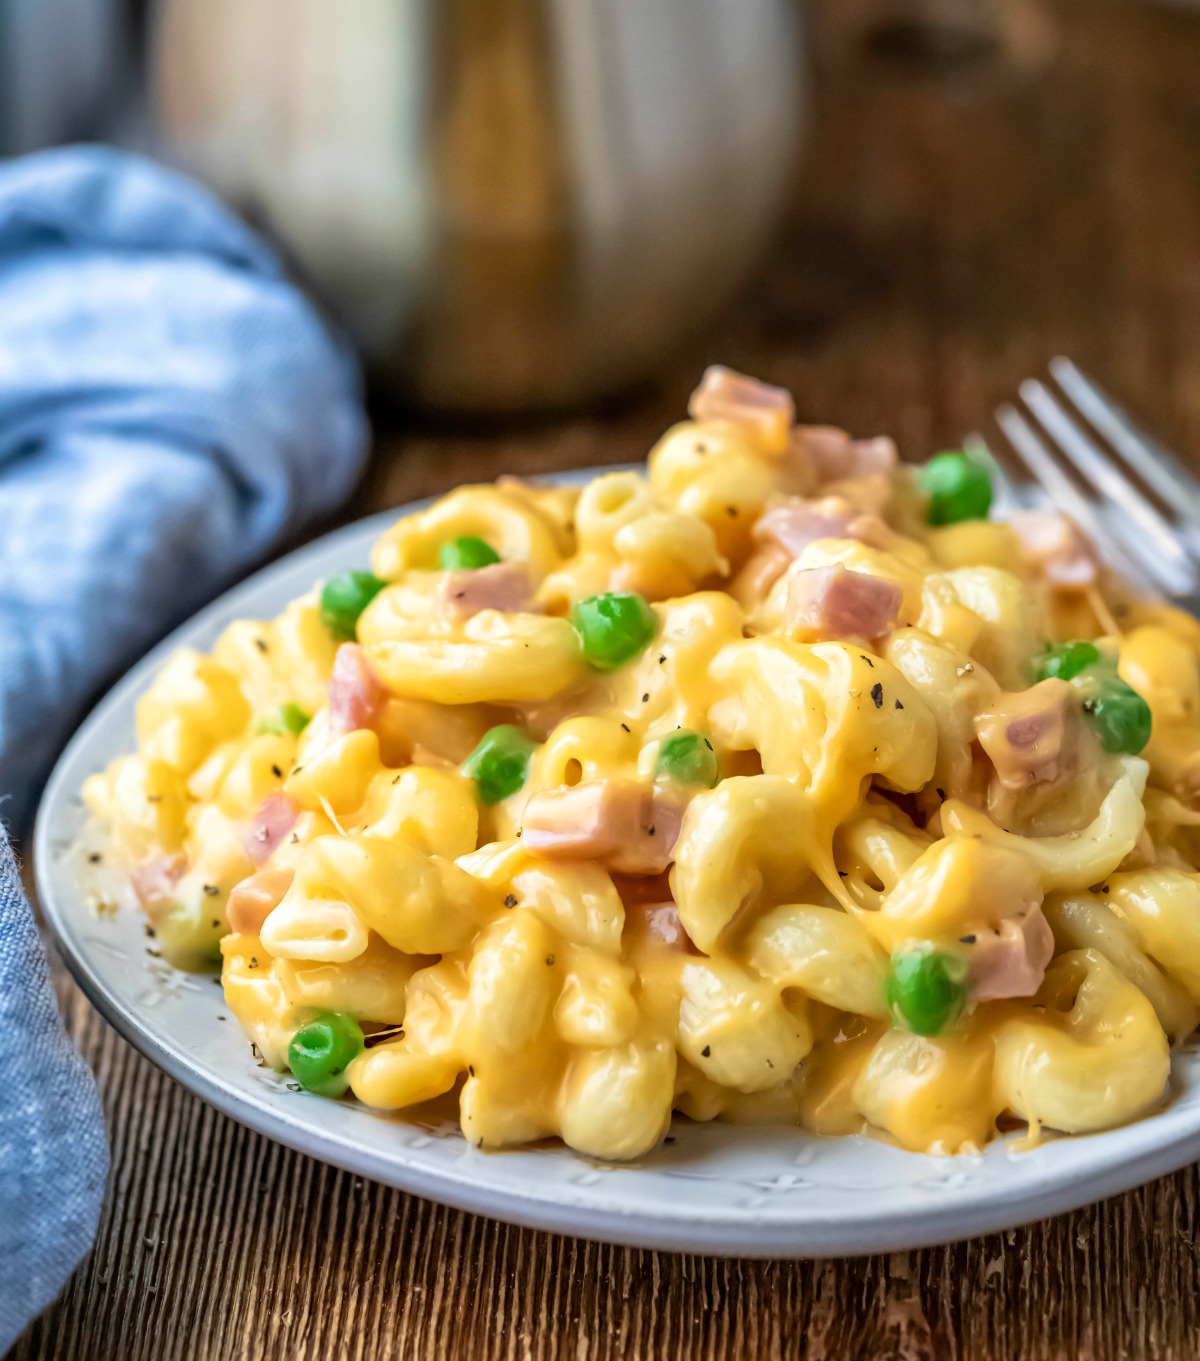 Plate of macaroni and cheese with ham and peas on a wooden cutting board